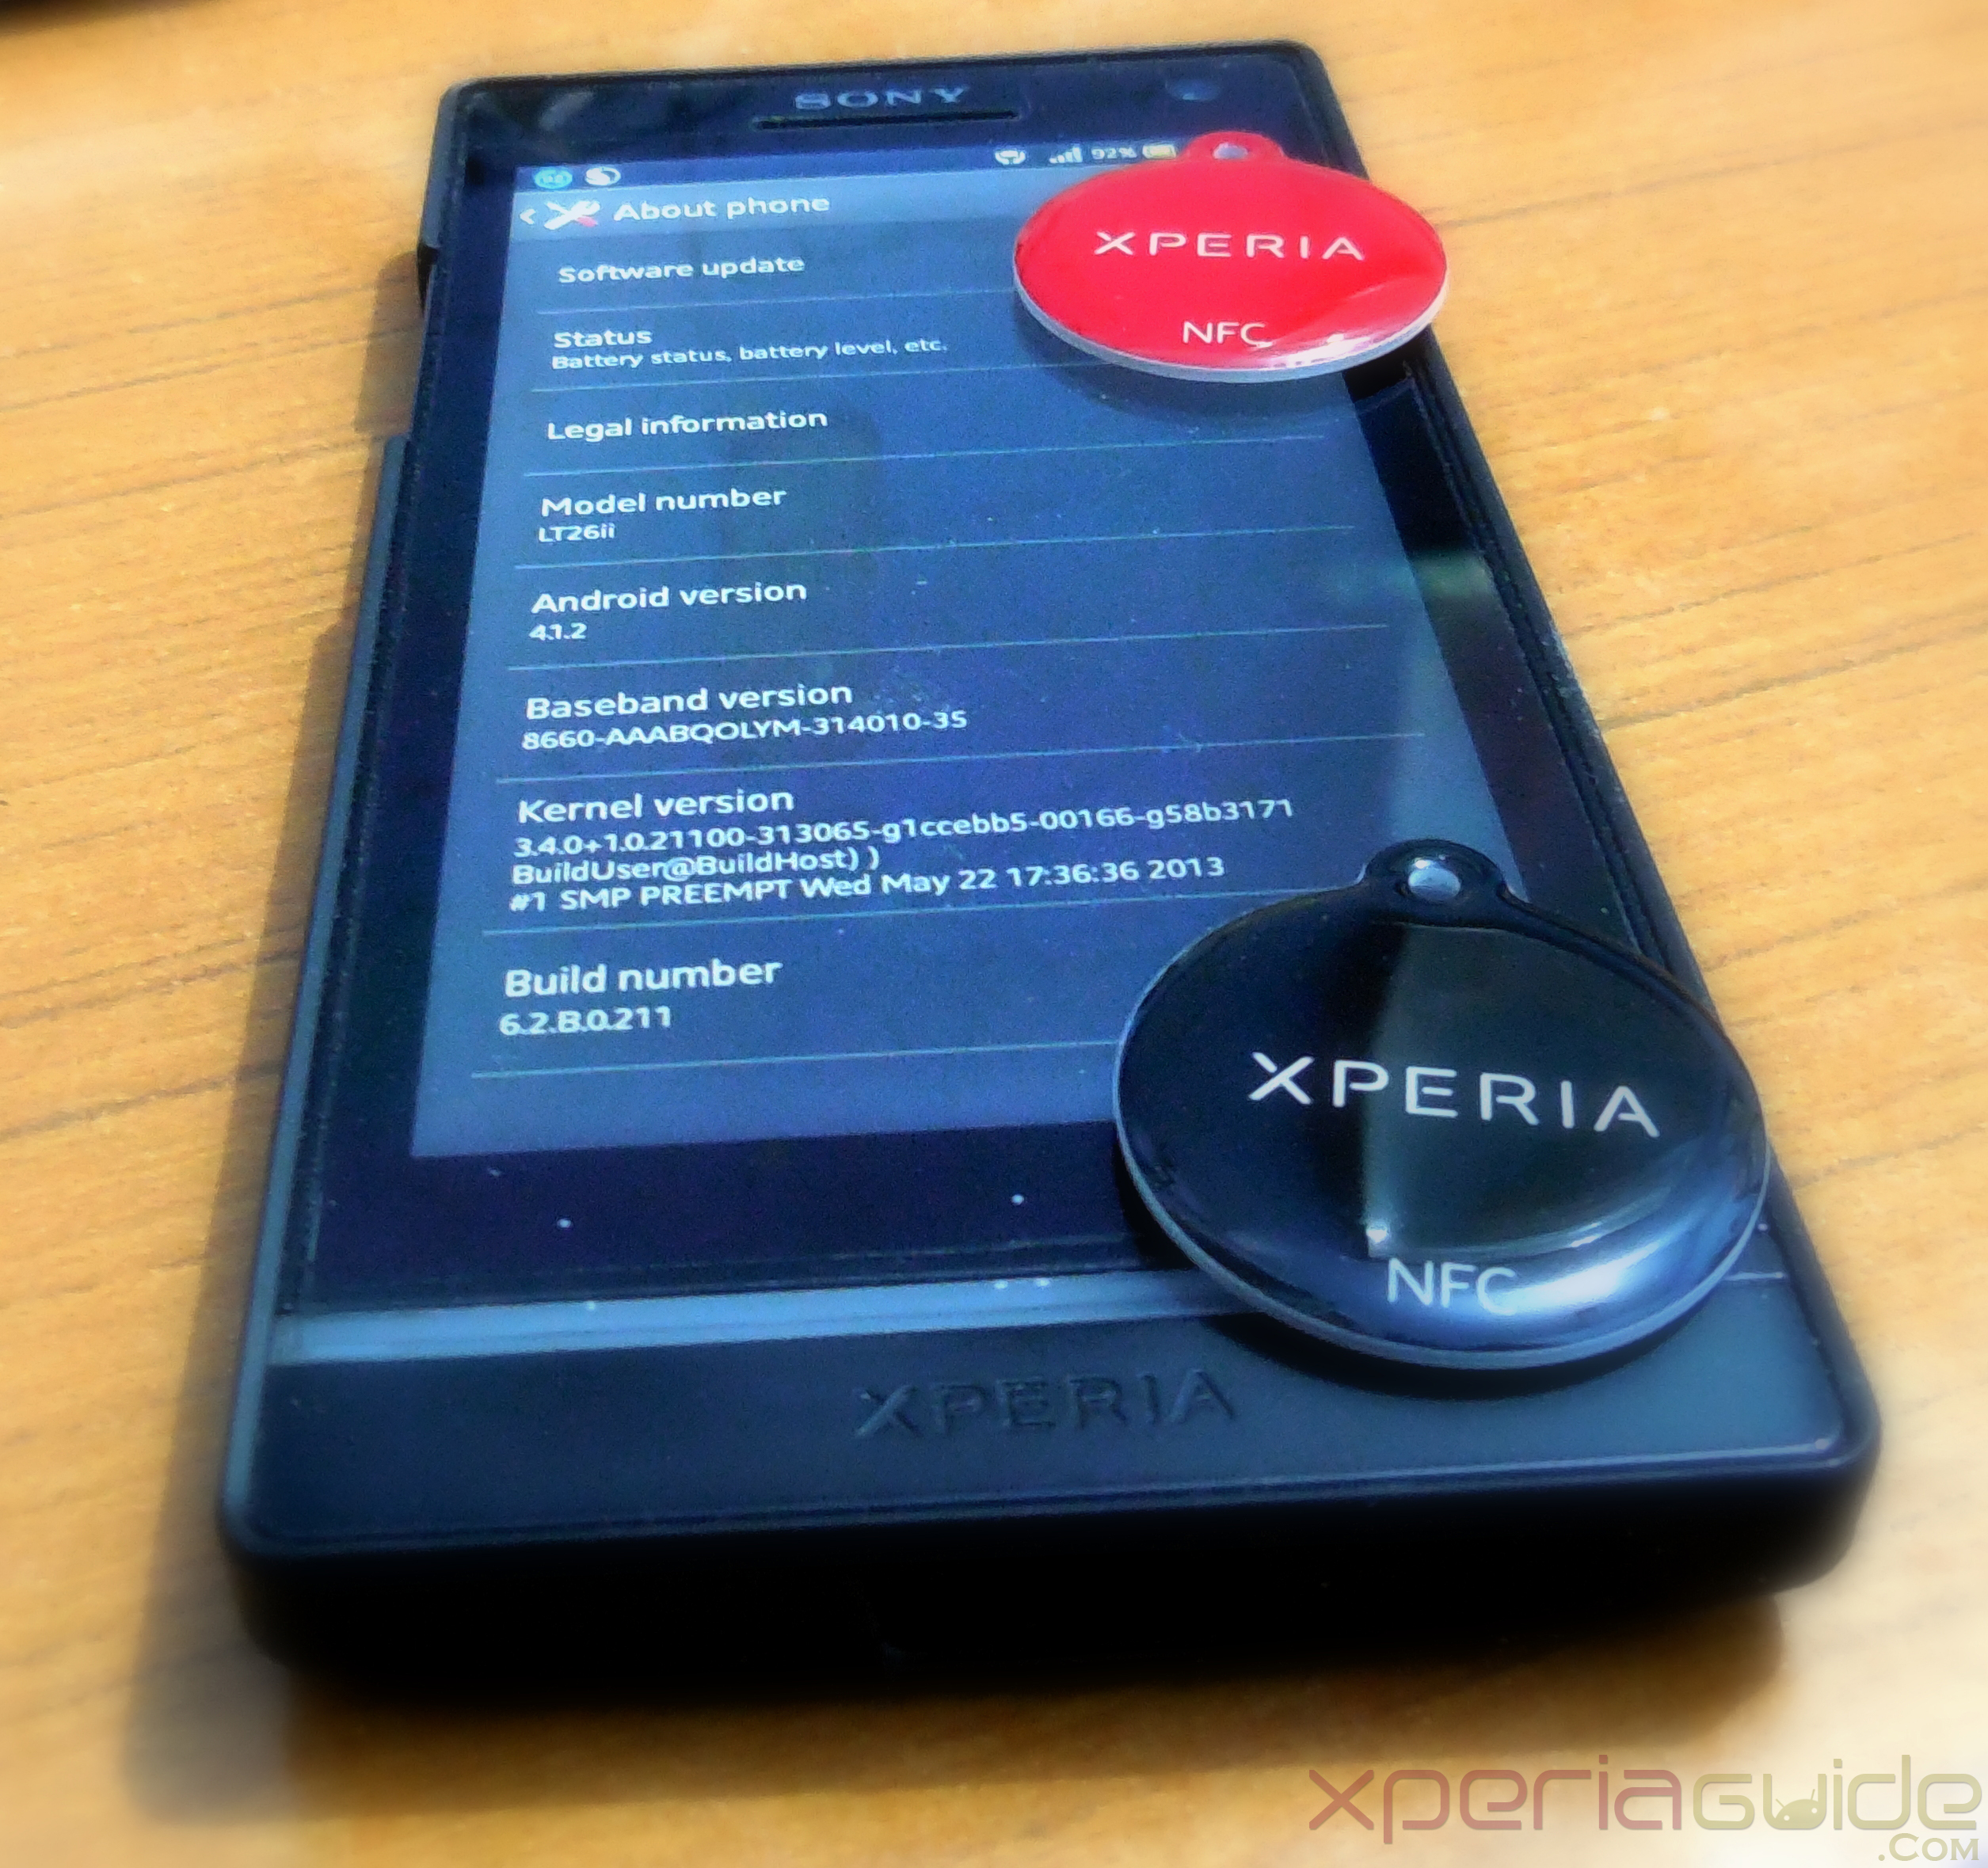 Xperia S, SL Jelly Bean - NFC Bug Fixing Update in Week 28 of July